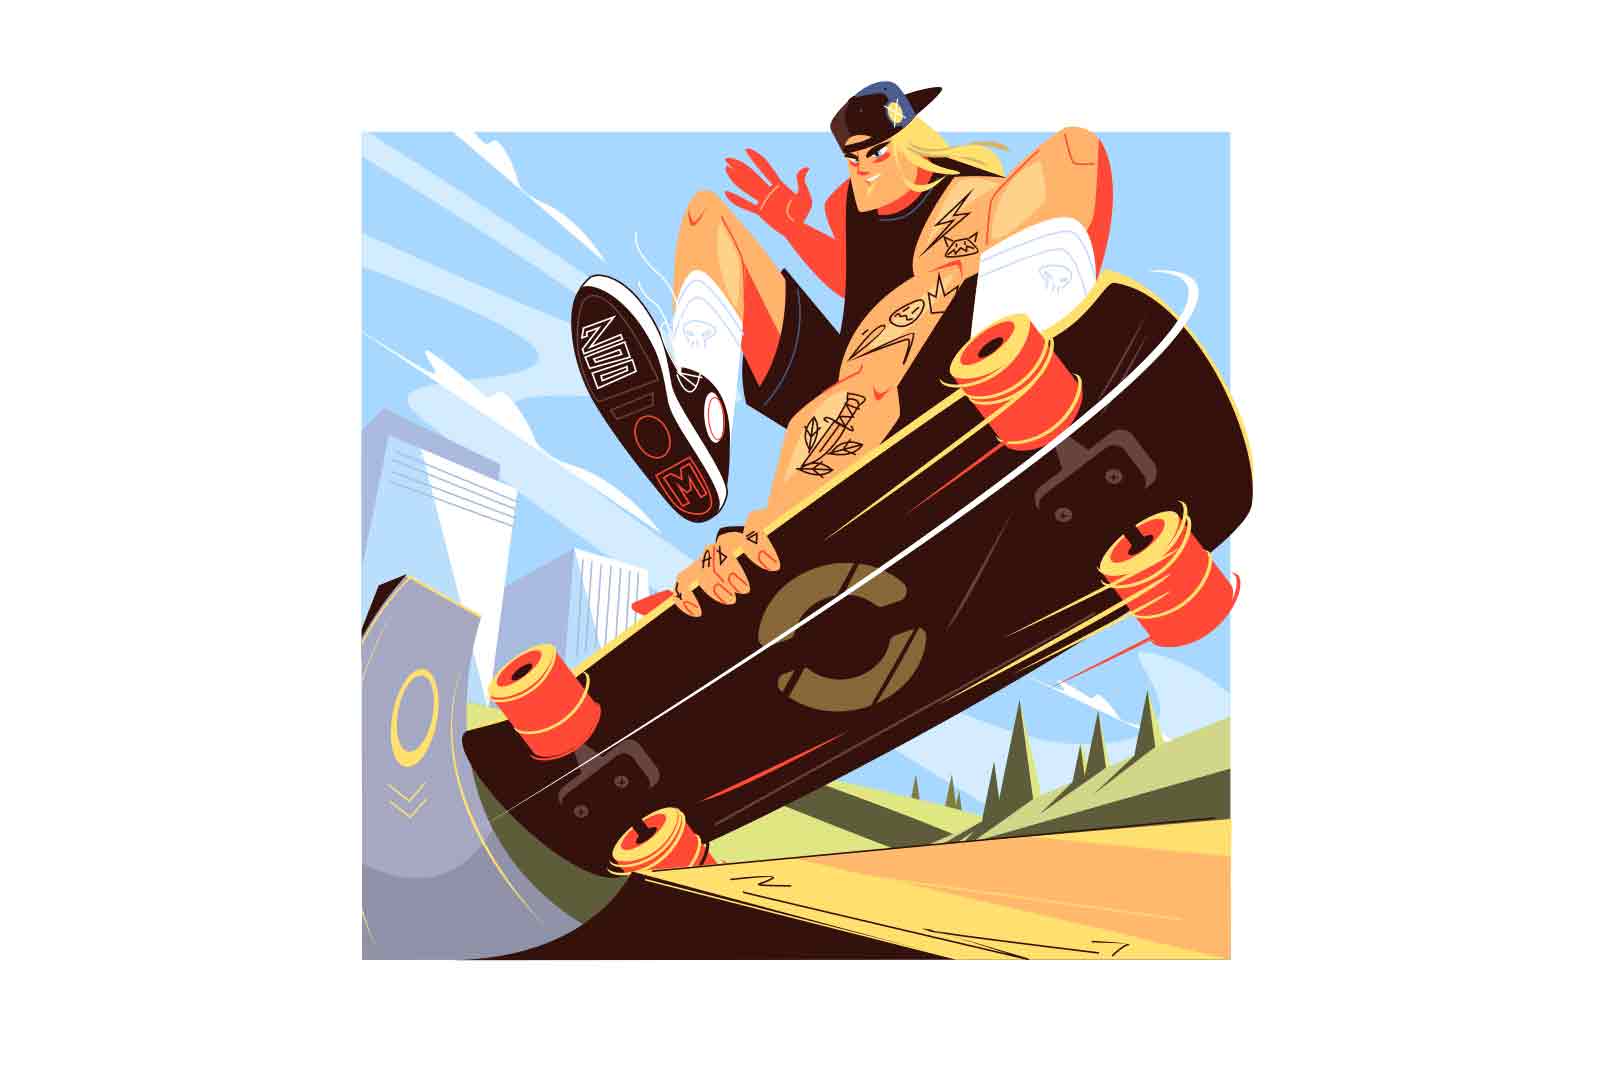 Cool young skater boy on board vector illustration. Guy perform trick on skateboard flat style. Youth, coolness, fun, entertainment concept